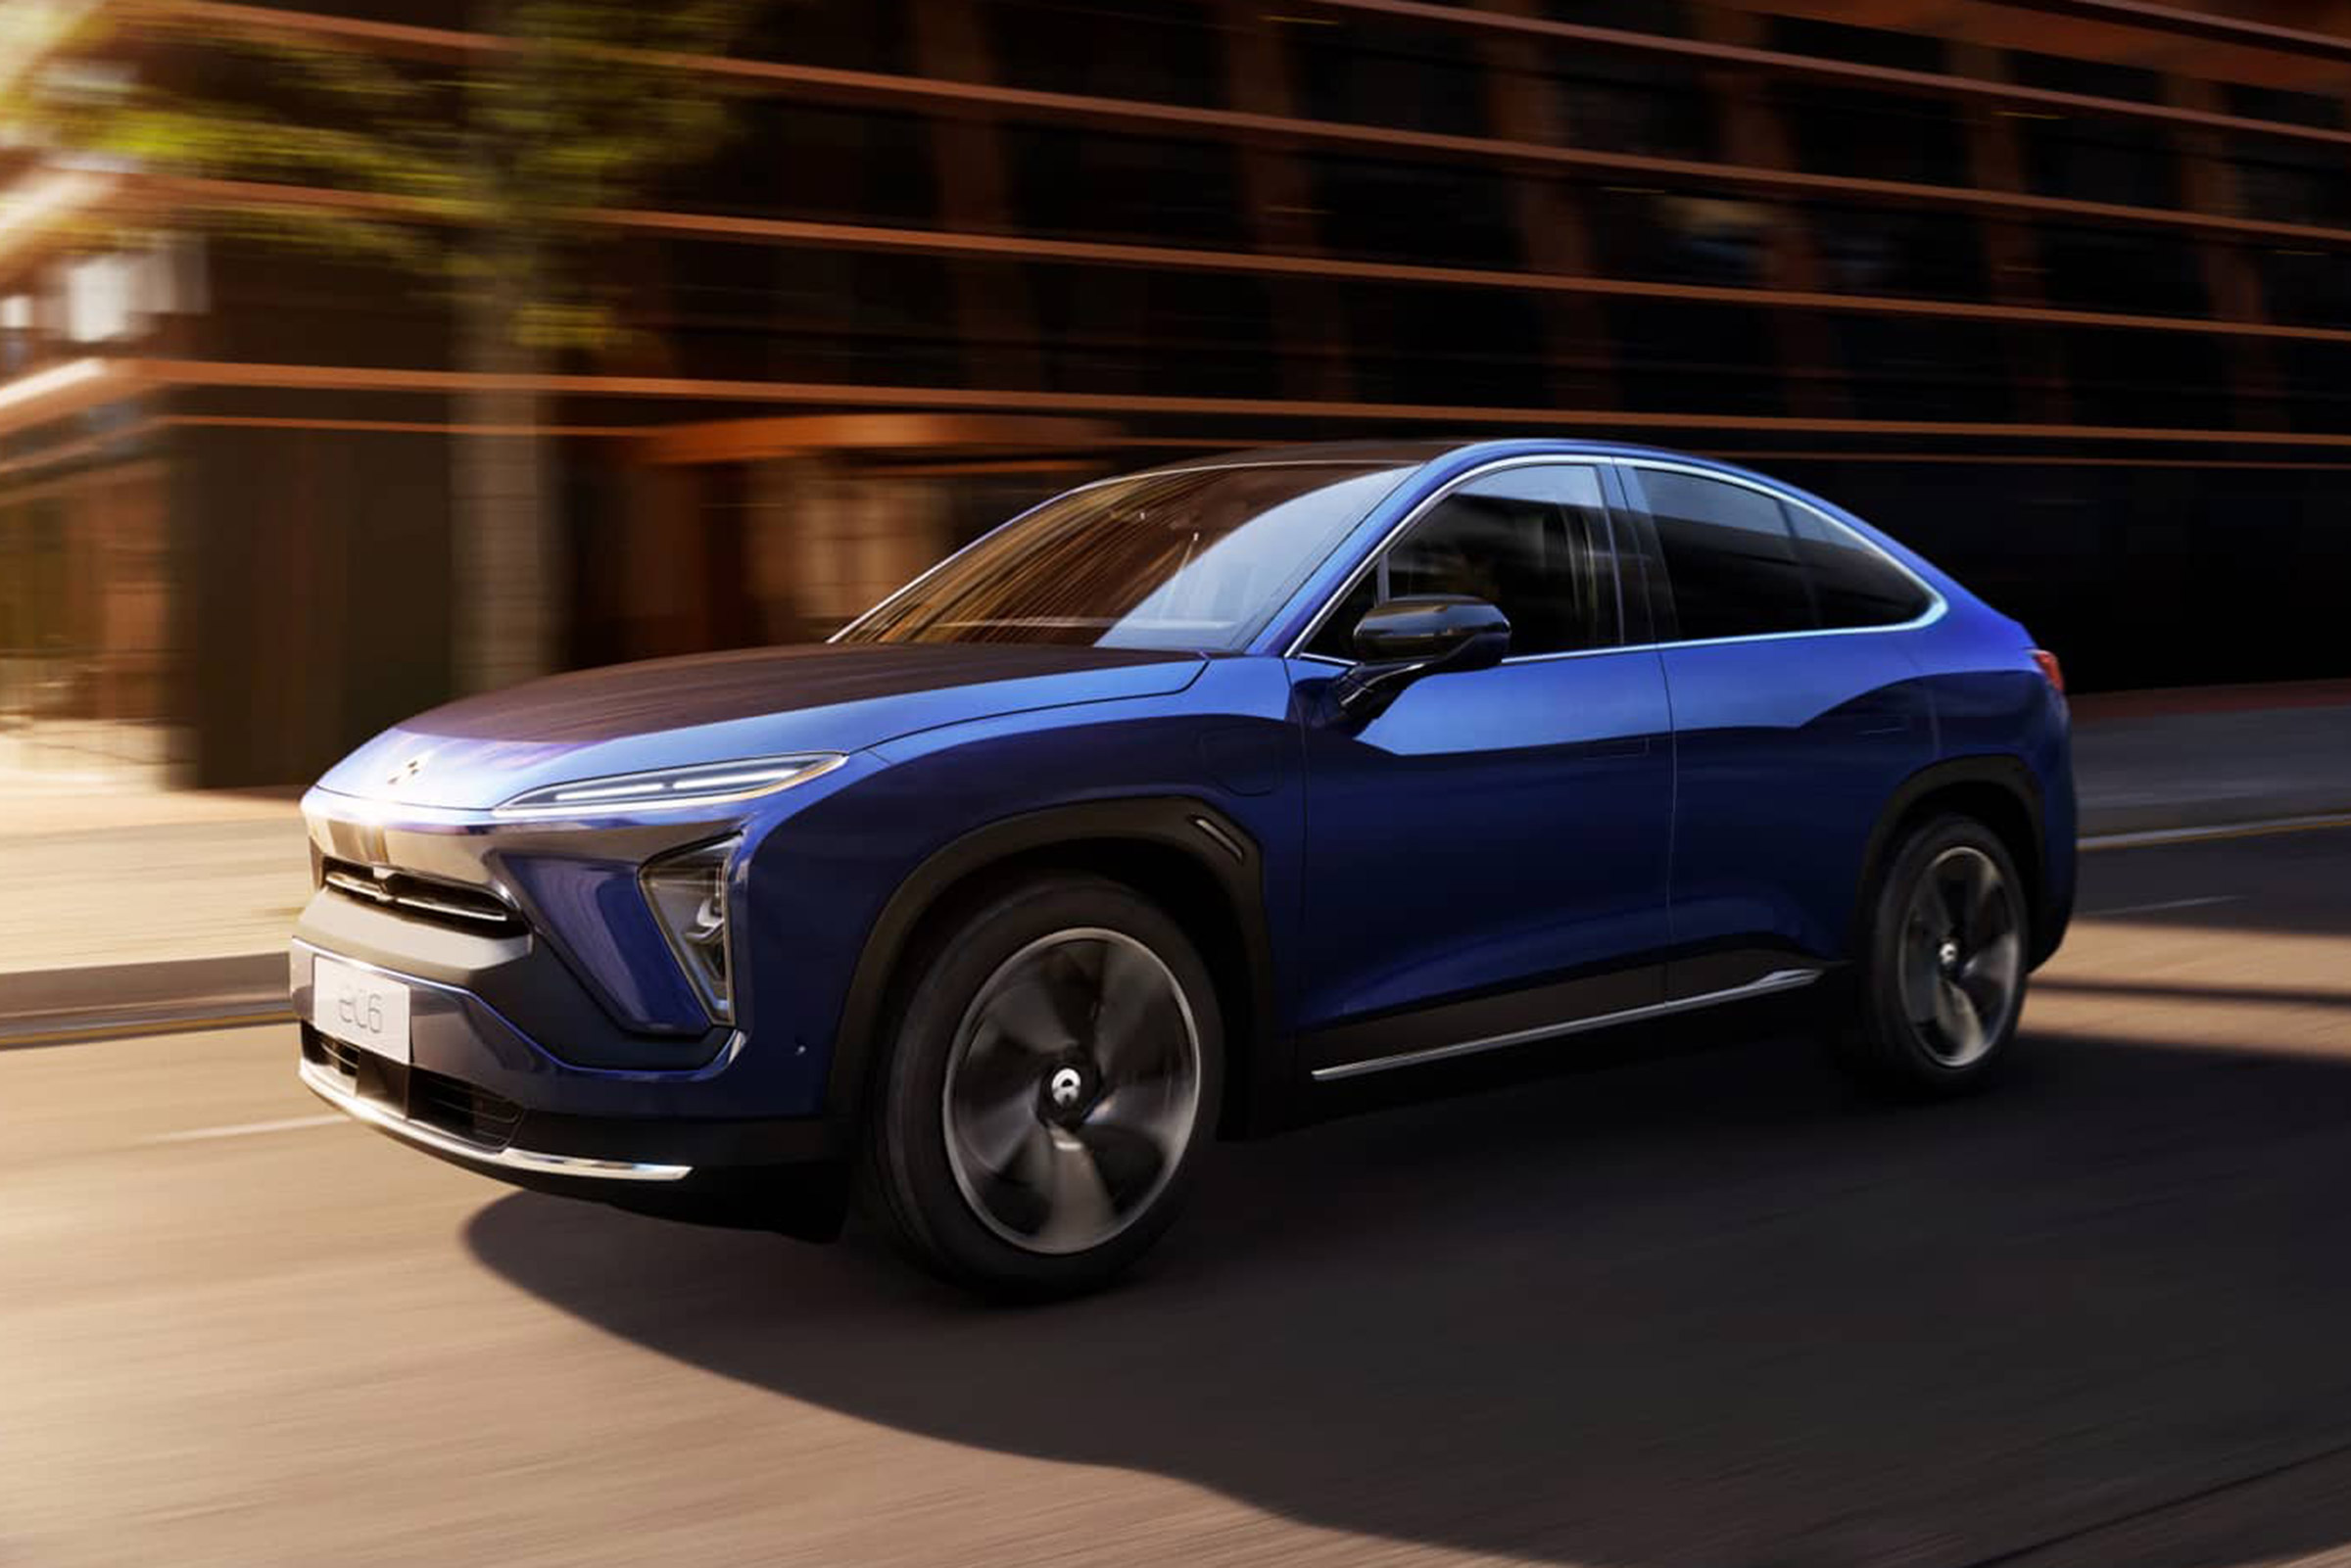 New NIO EC6 electric SUV launched with up to 382 miles of range | Auto